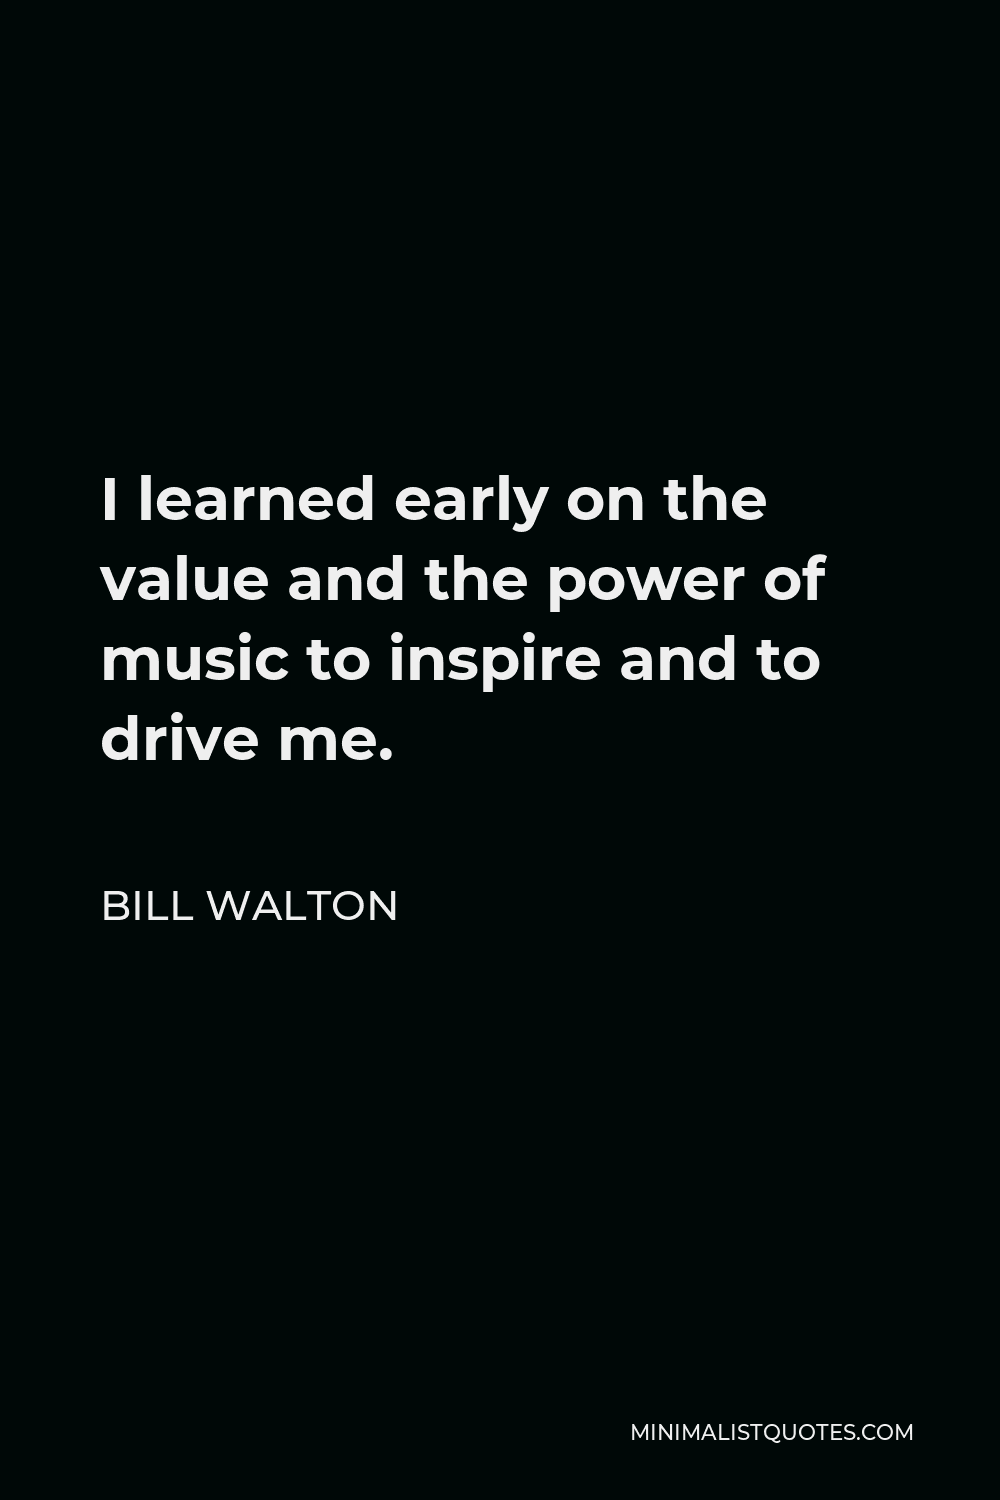 Bill Walton Quote - I learned early on the value and the power of music to inspire and to drive me.